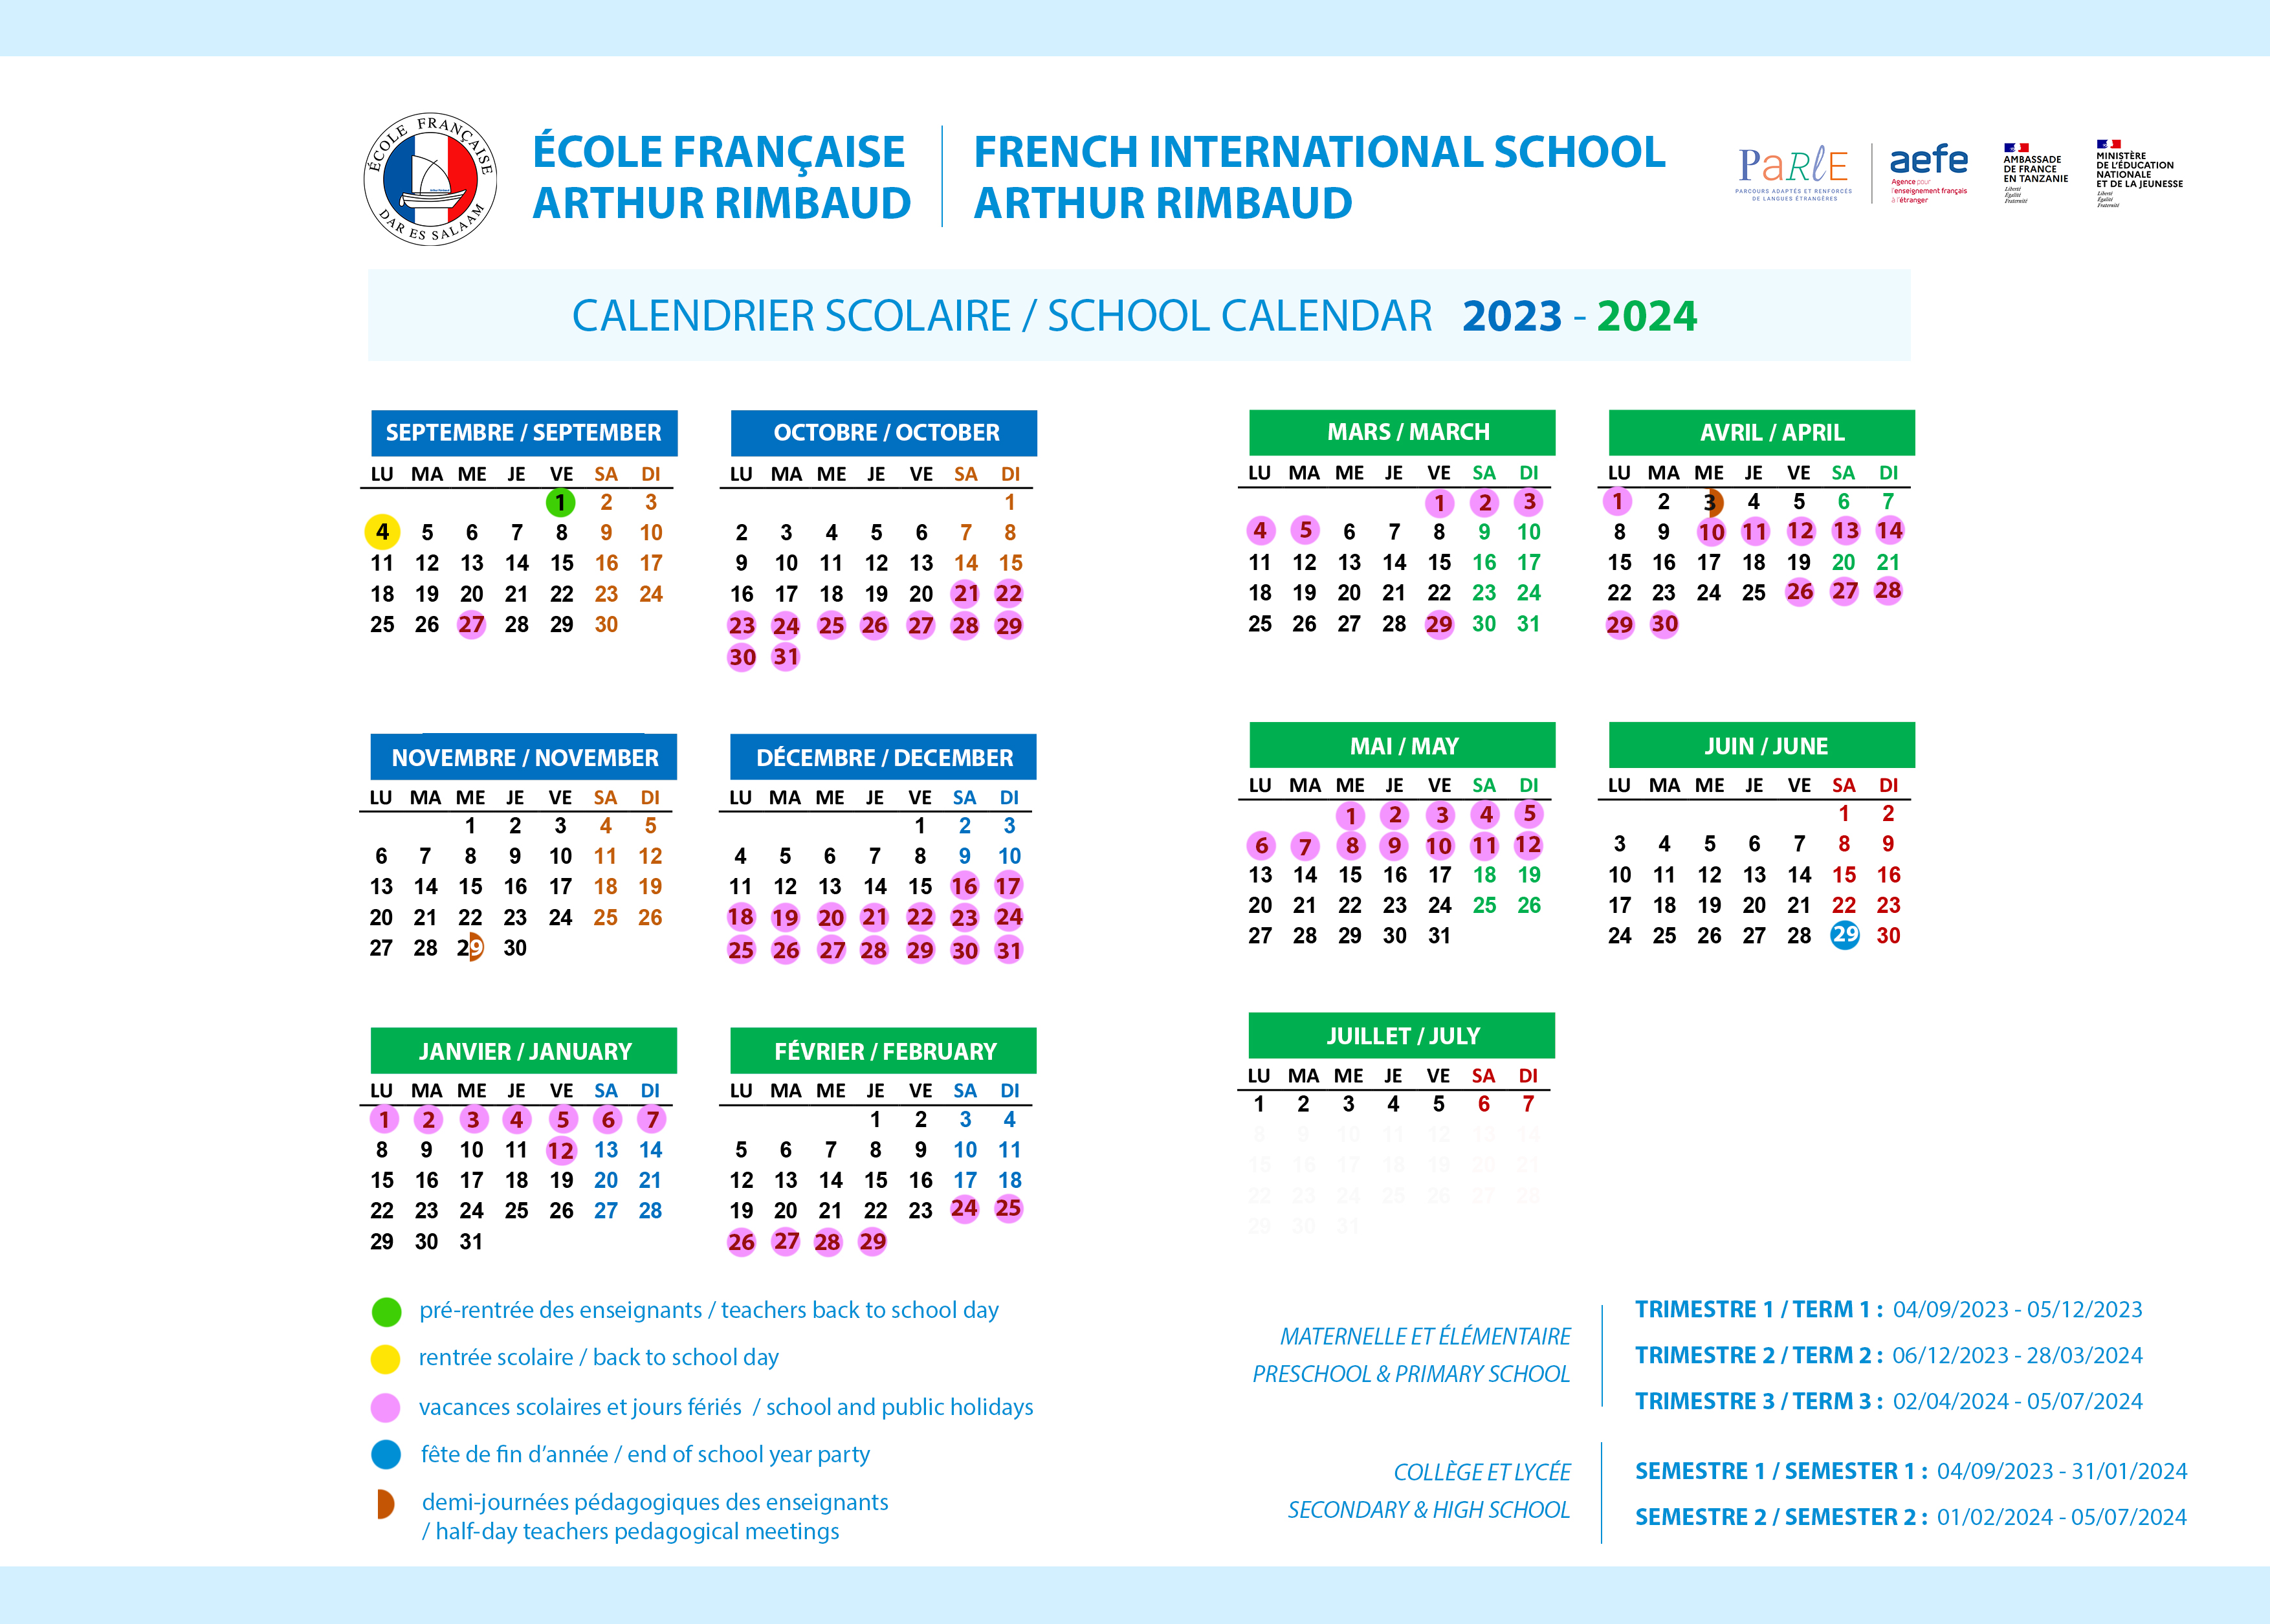 Calendrier scolaire Arthur Rimbaud The French School Society Dar